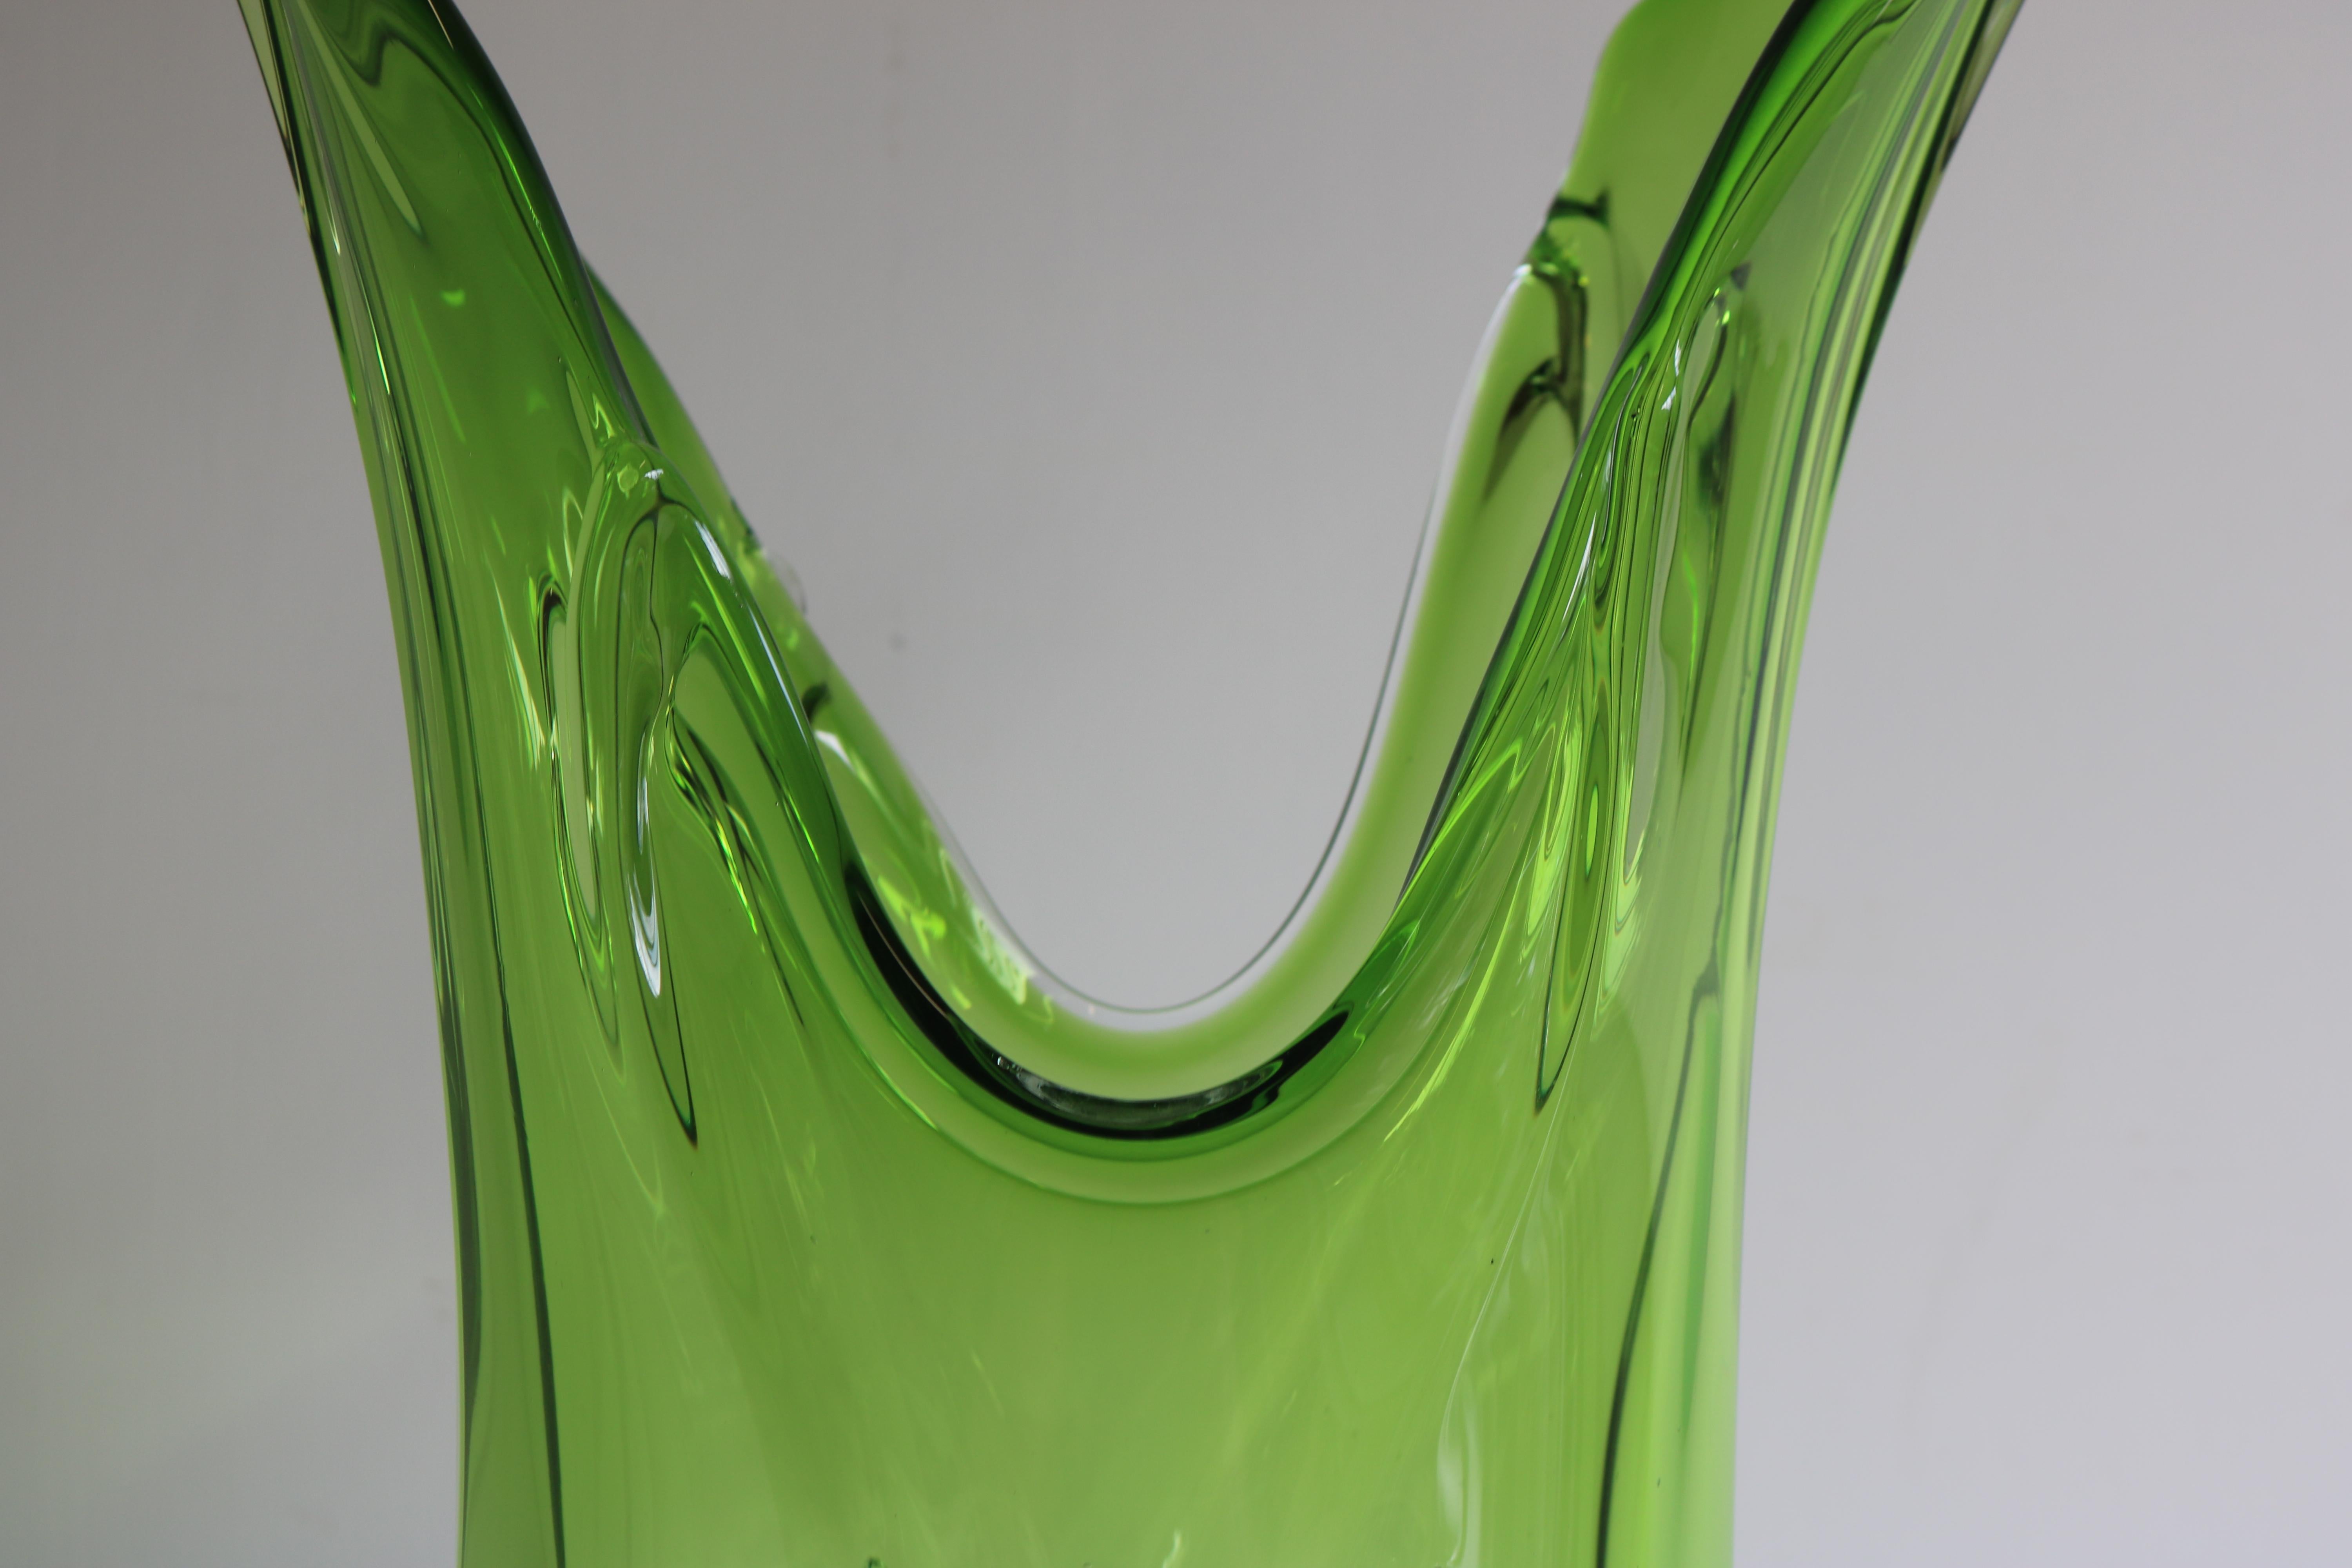 Large 5.4kg Italian Murano Glass vase Attr. Fratelli Toso 1950 Green Sommerso  For Sale 3